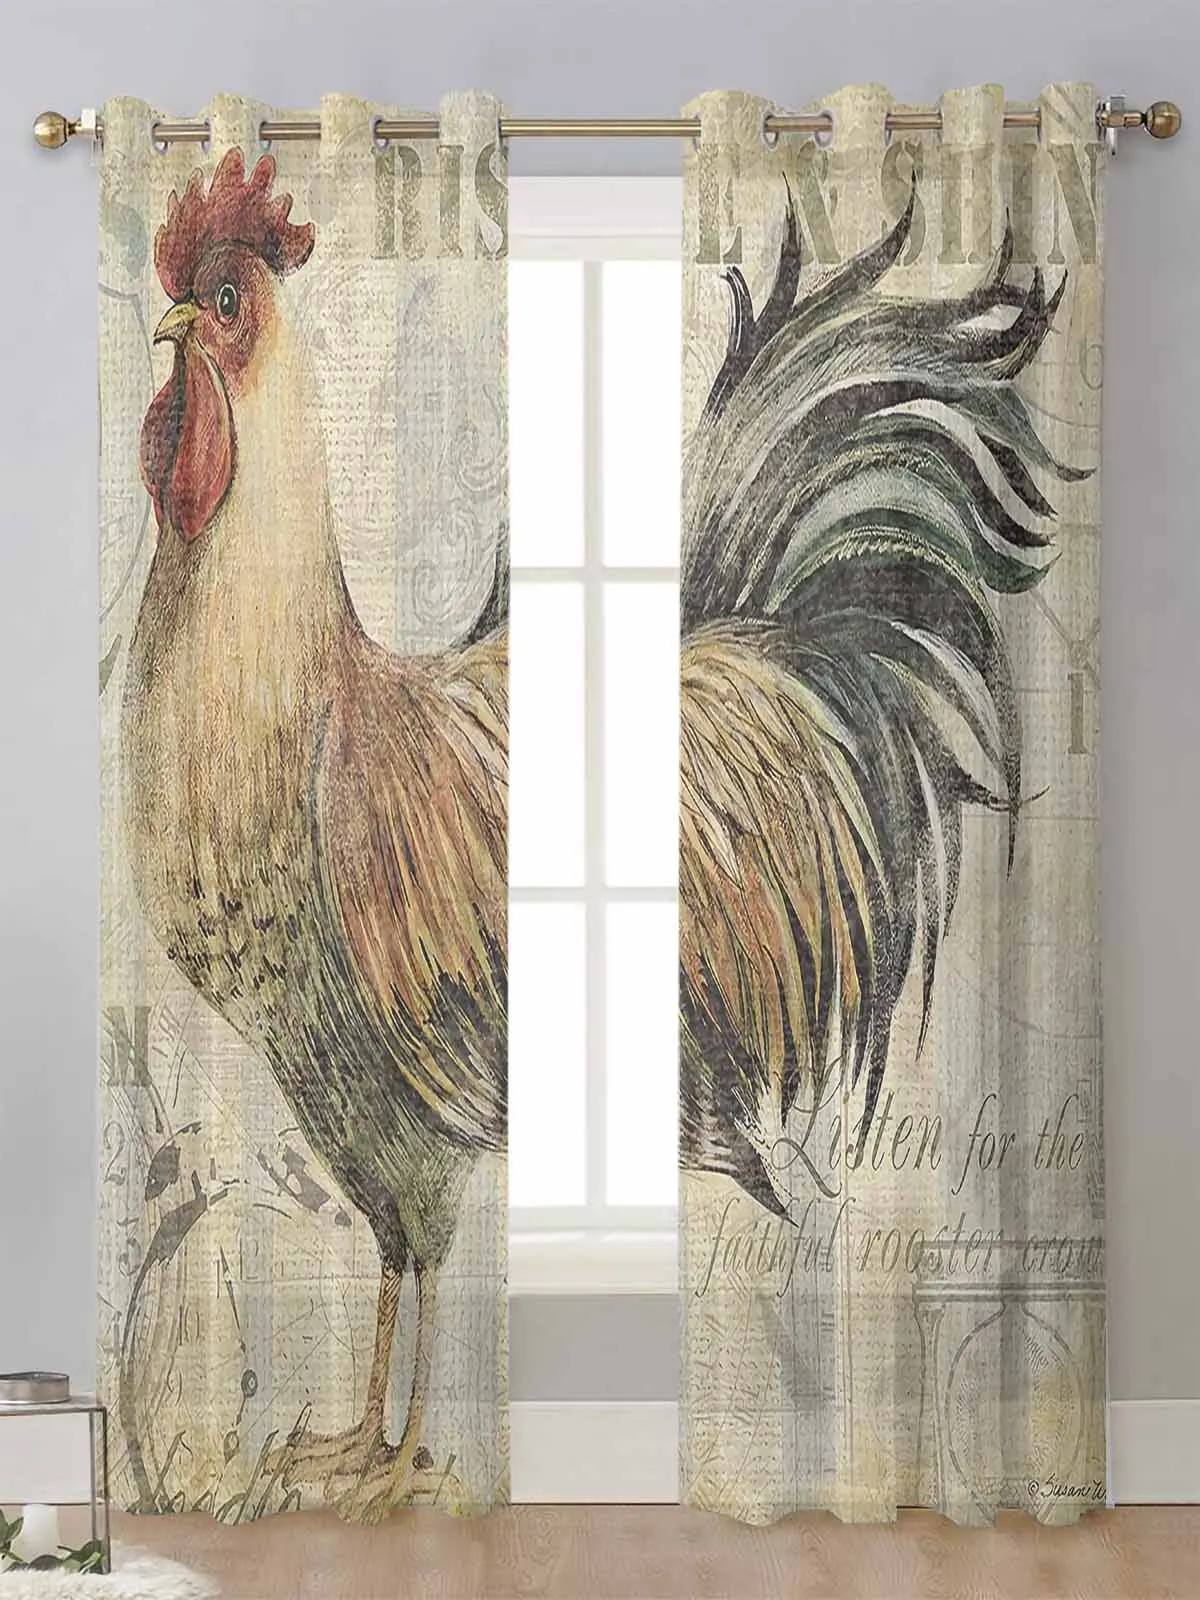 

Vintage Rooster Retro Farm Sheer Curtains For Living Room Window Transparent Voile Tulle Curtain Cortinas Drapes Home Decor